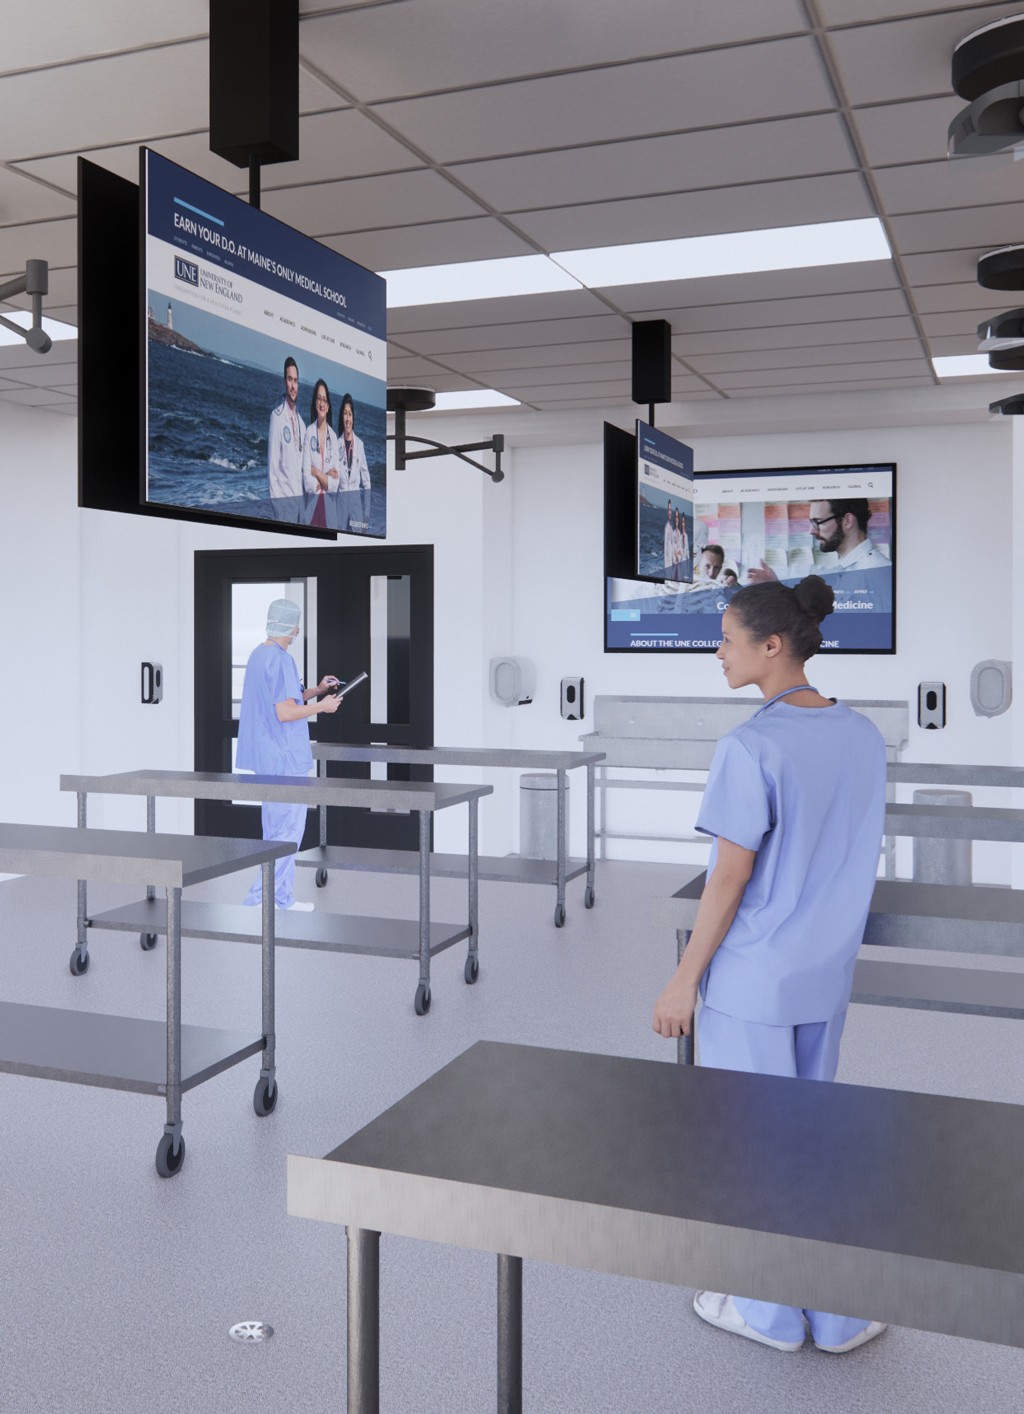 A rendering of the upcoming anatomy lab in the new C O M building showing tv screens and silver tables